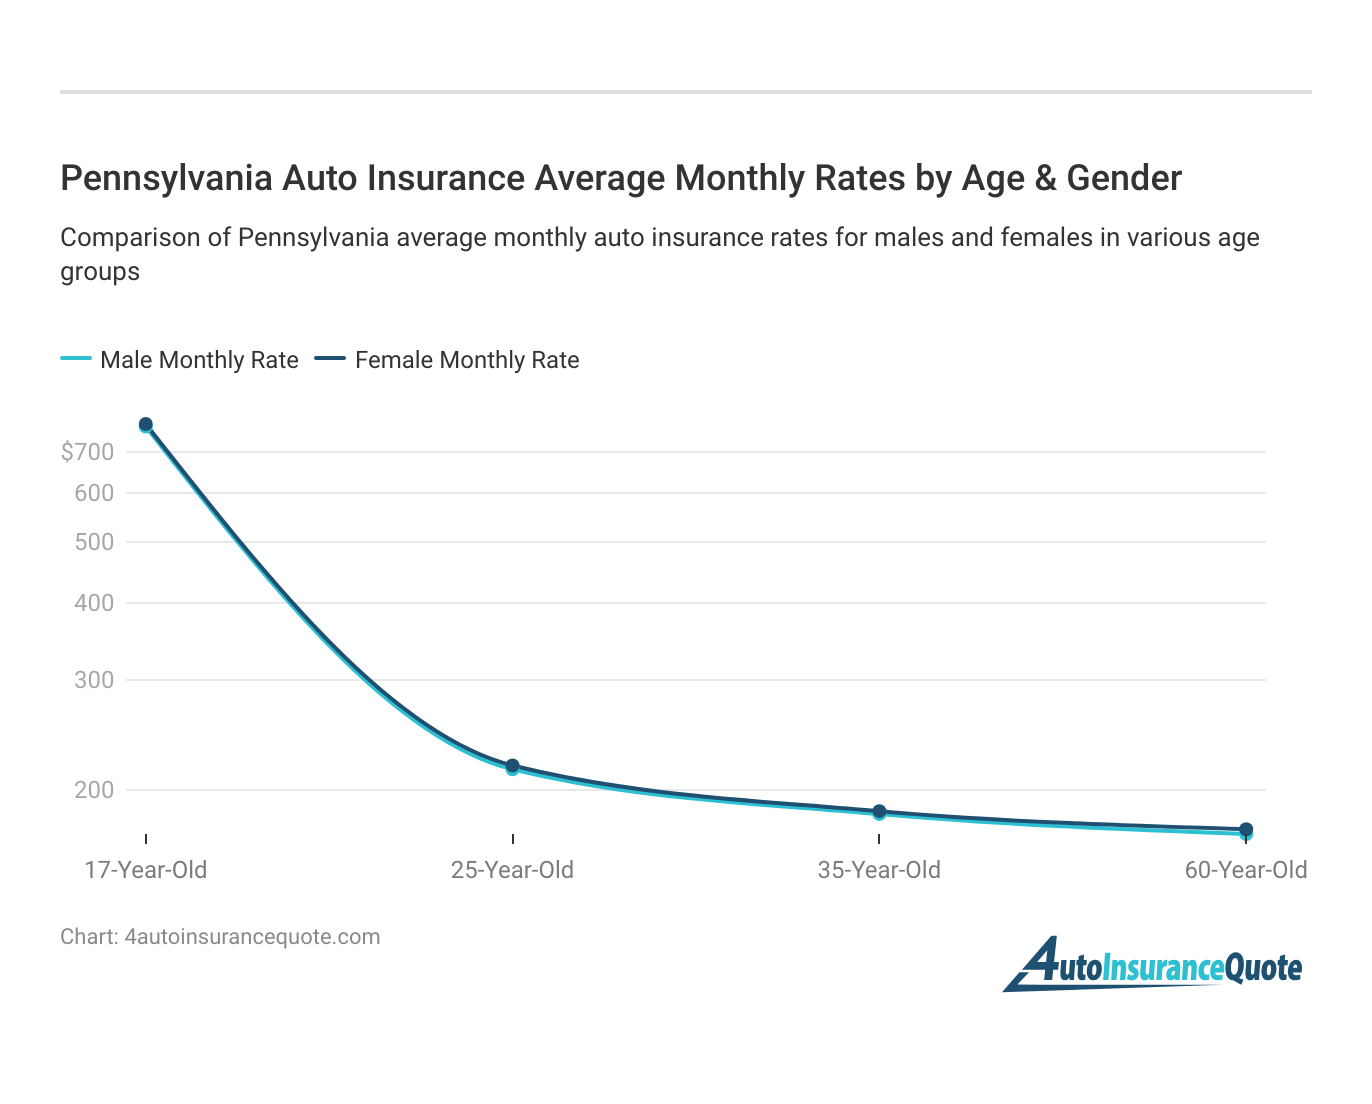 <h3>Pennsylvania Auto Insurance Average Monthly Rates by Age & Gender</h3>